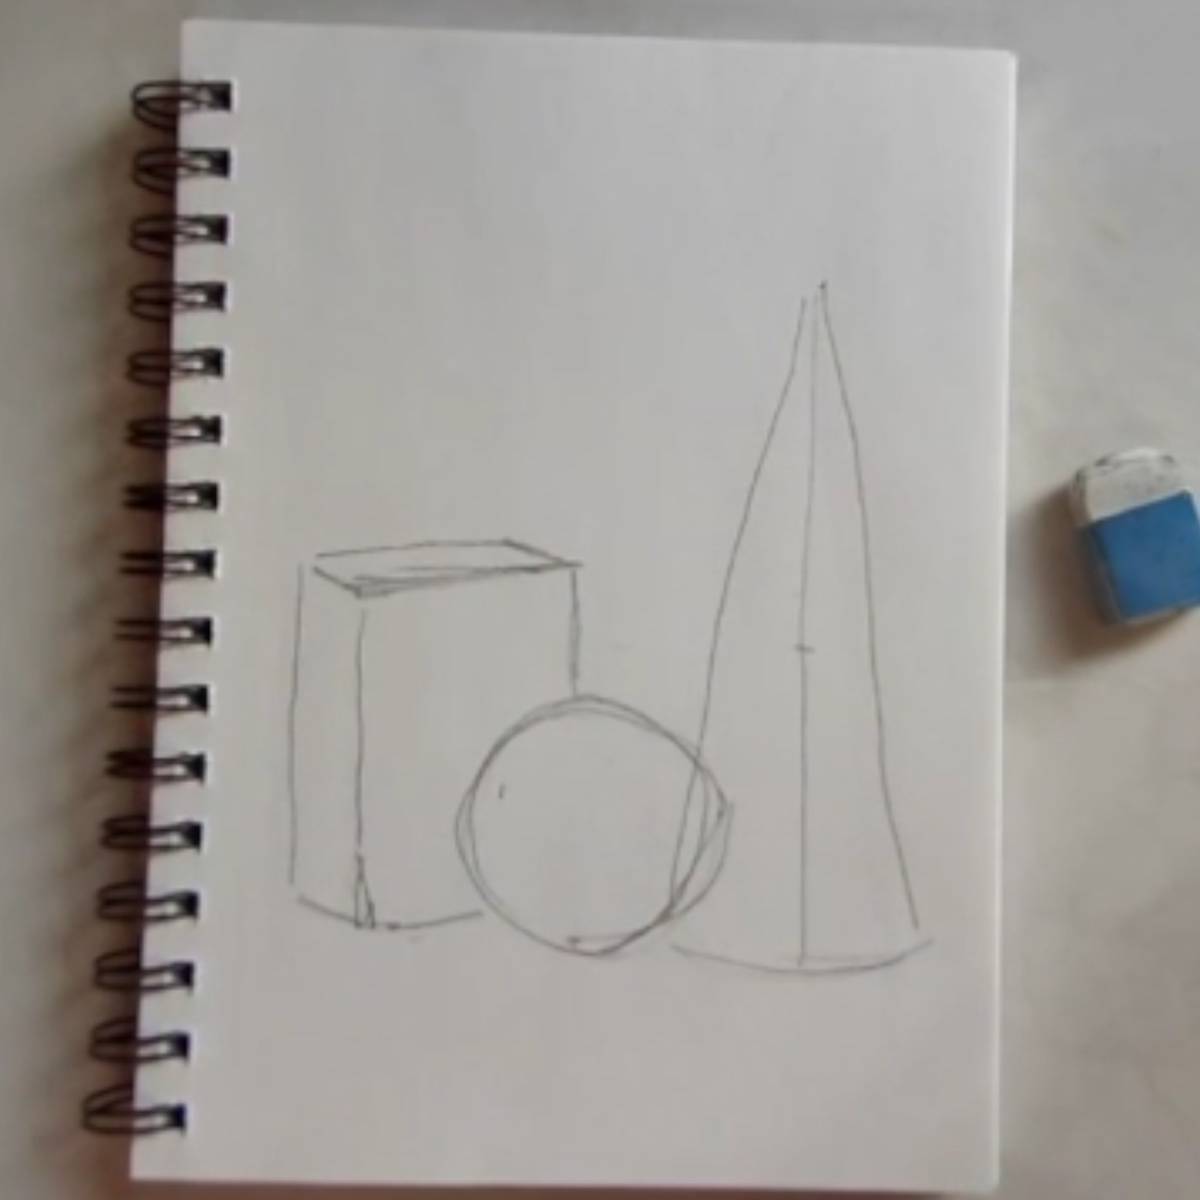 Sketch of a cone, sphere, and box on a spiral ring notebook with an eraser. 